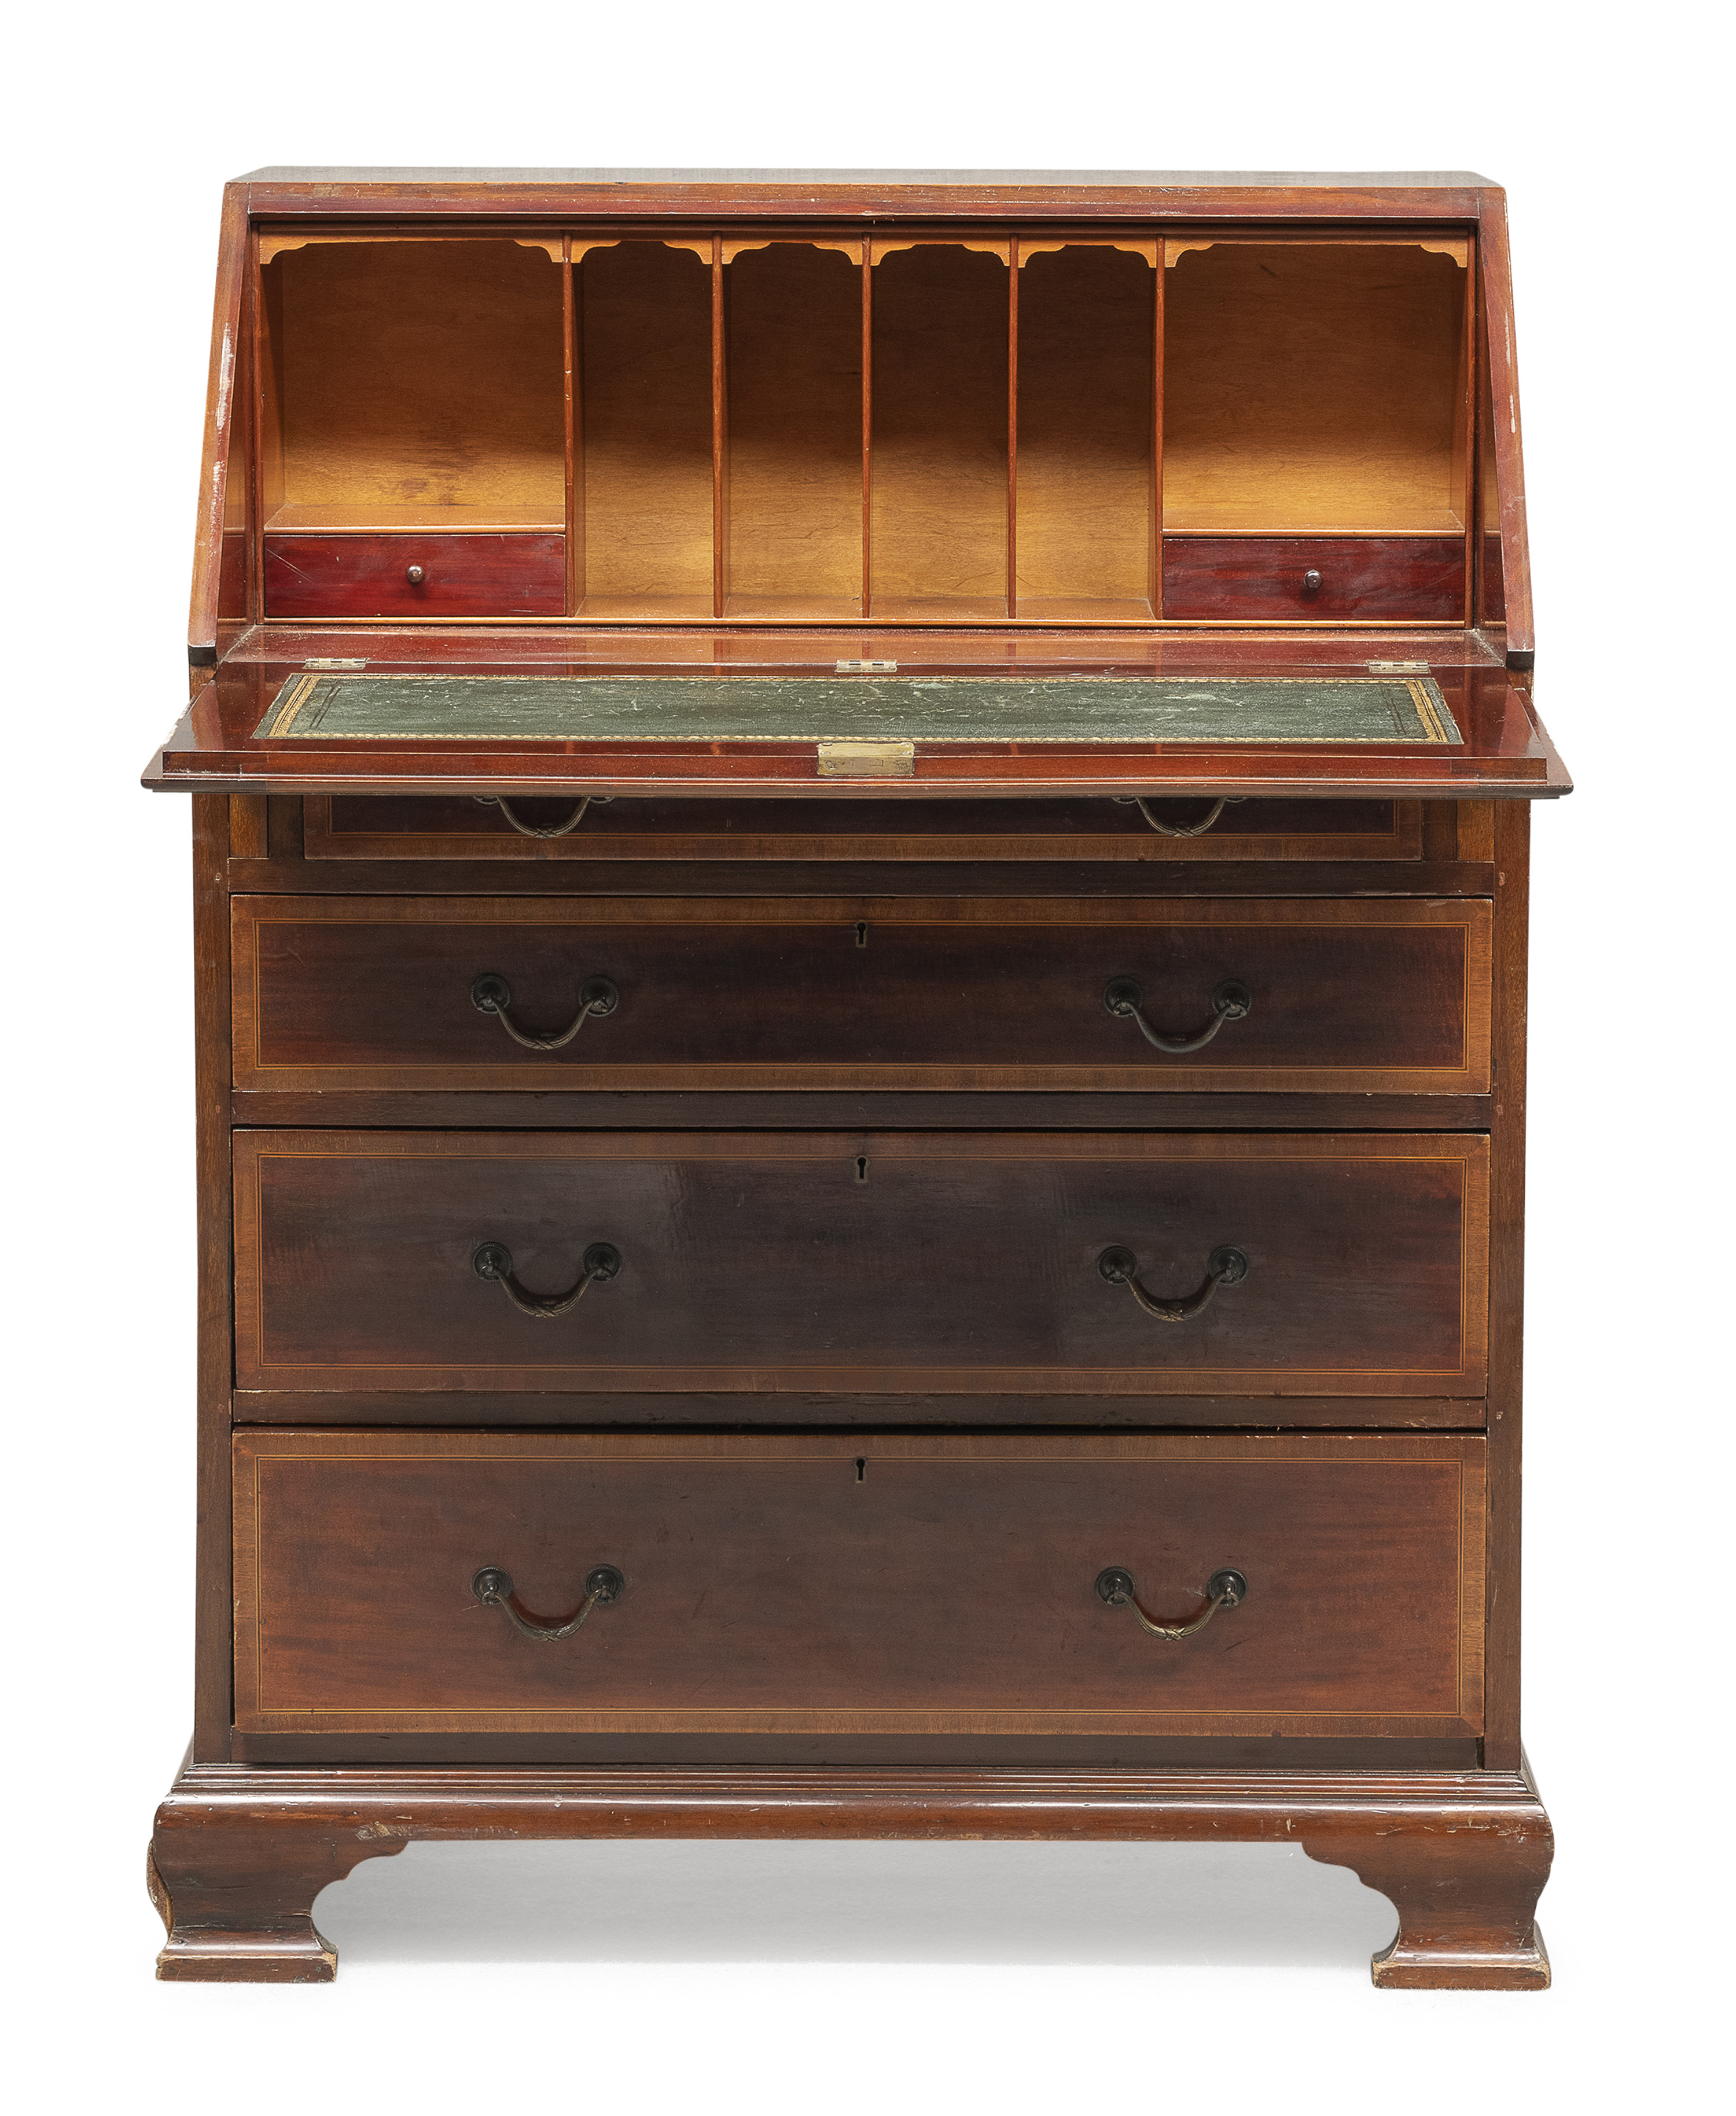 SMALL MAHOGANY SECRETAIRE ENGLAND END OF 19TH CENTURY - Image 2 of 2